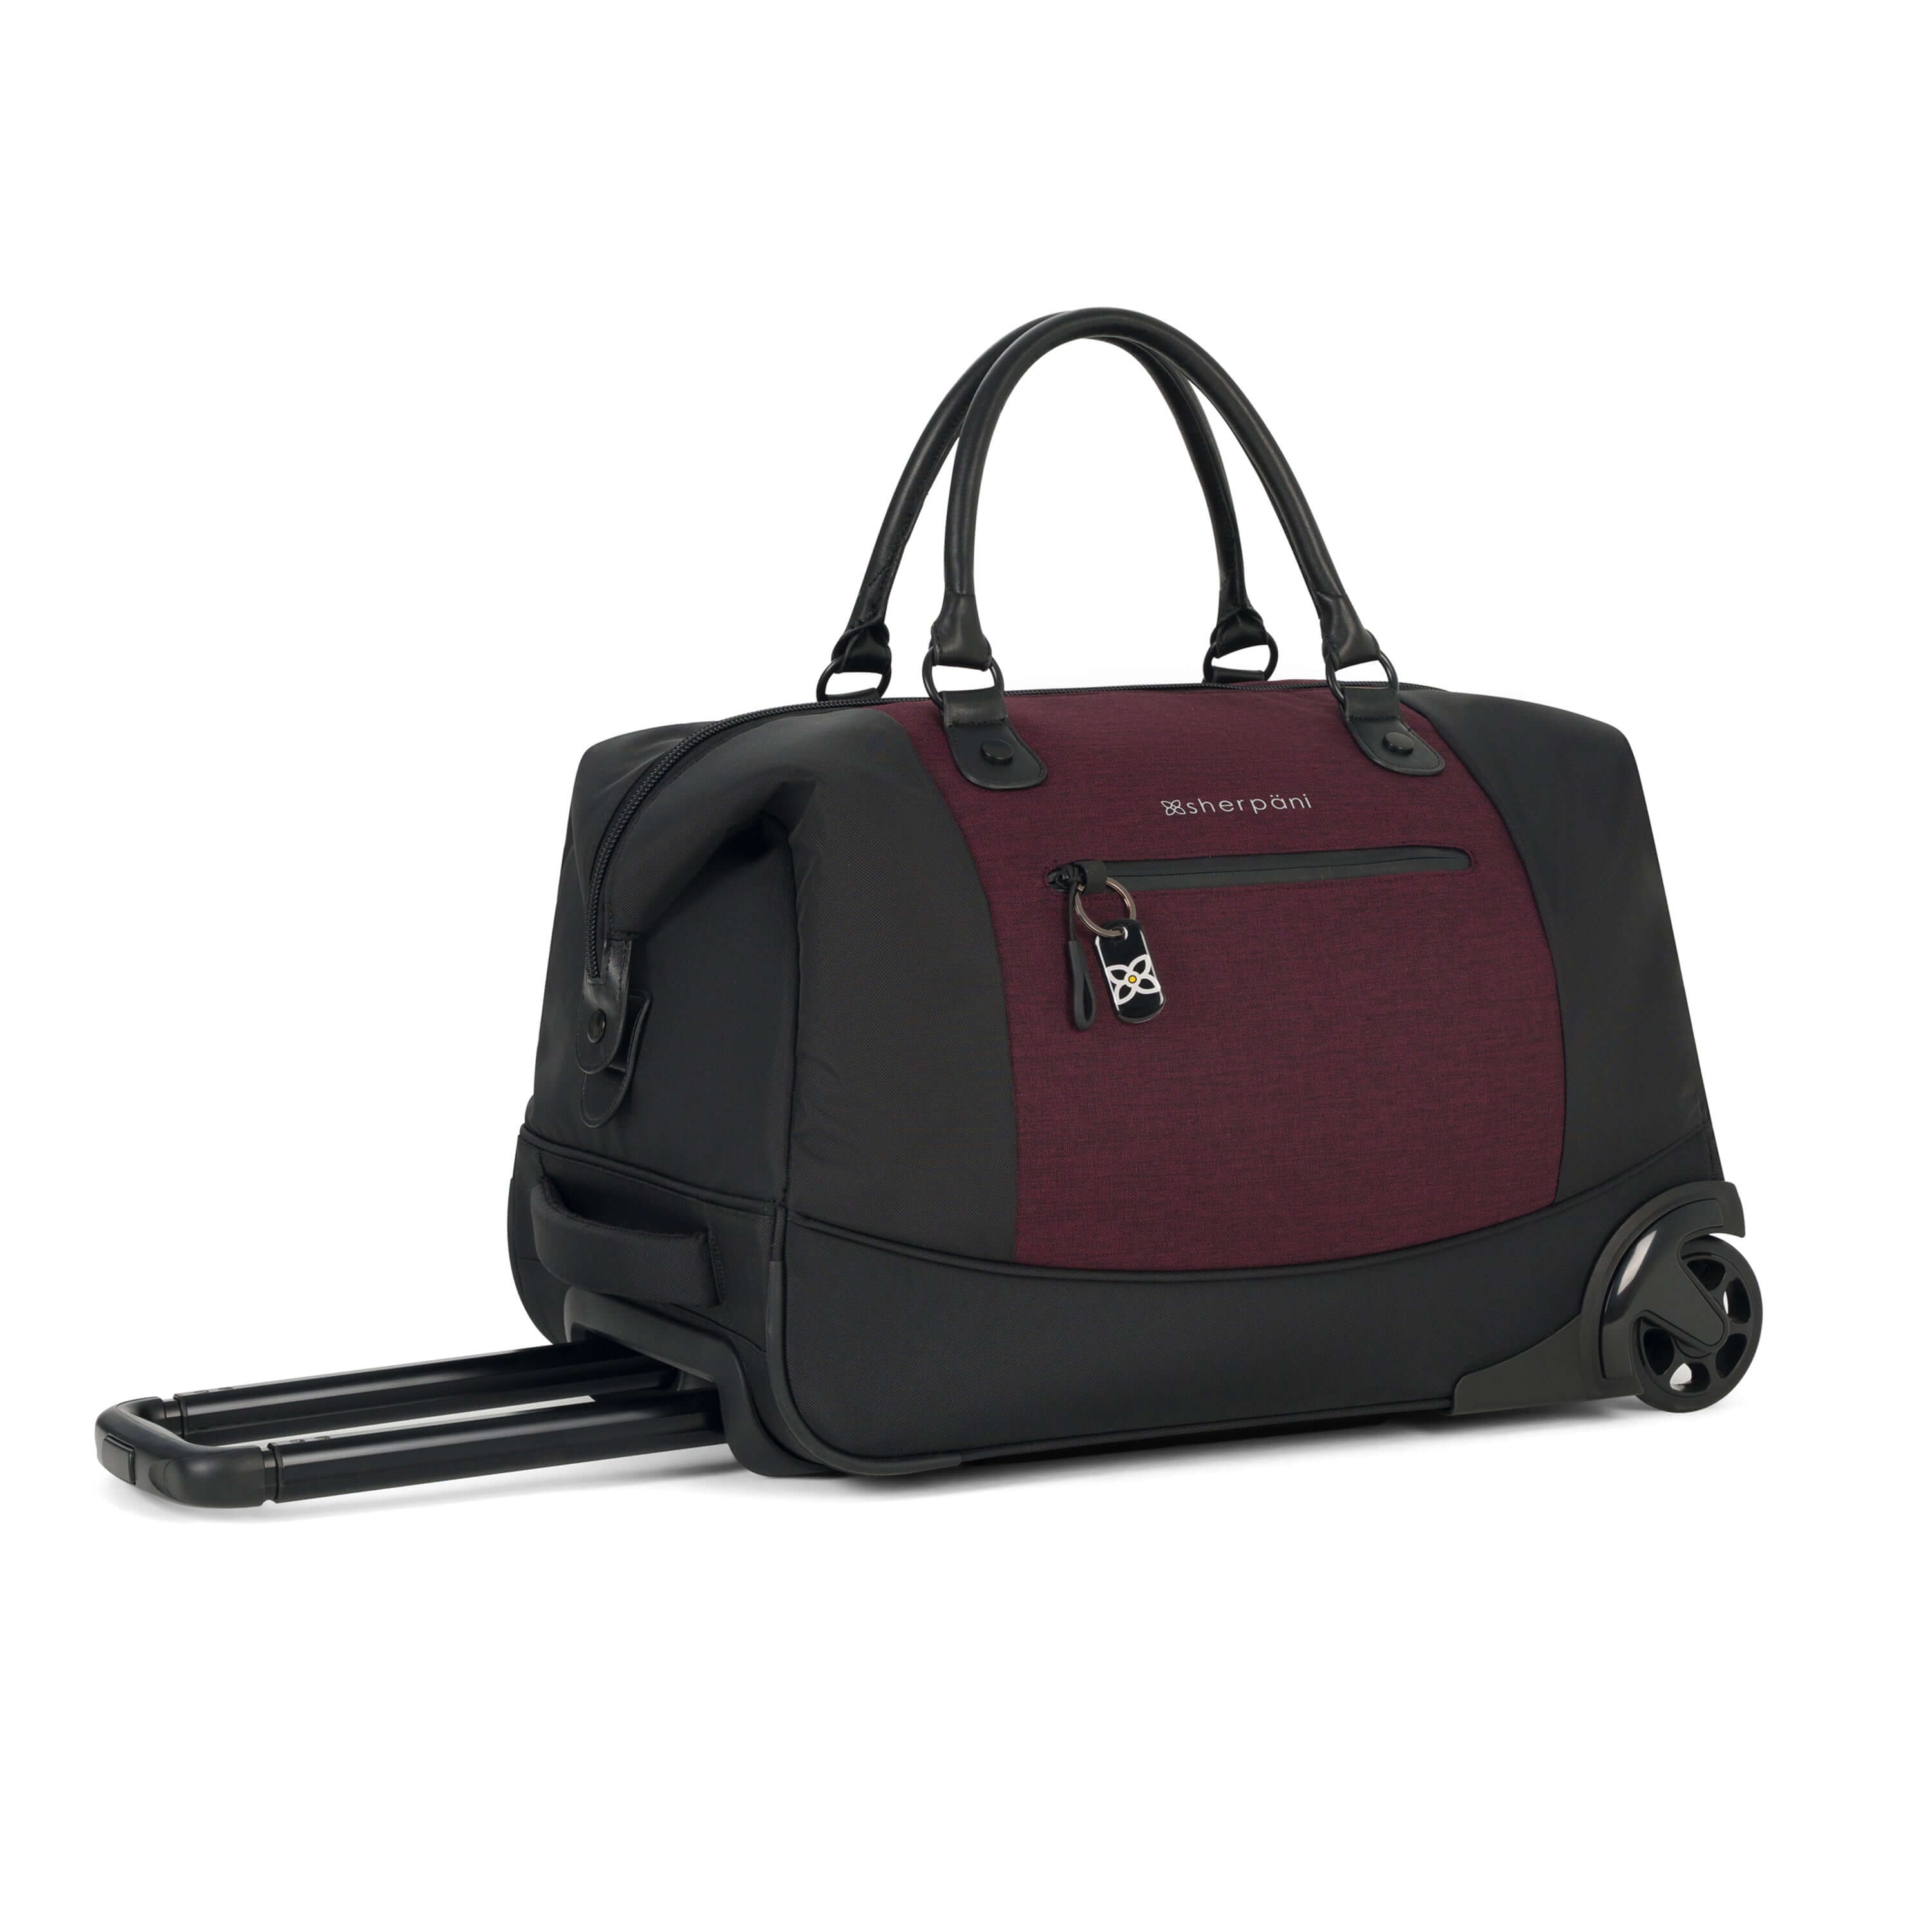 Angled front view of Sherpani’s Anti Theft rolling Duffle, the Trip in Merlot, with vegan leather accents in black. The bag lies flat on the ground with the luggage handle extended on the left side and the rolling wheels shown on the right side. The bag features short tote handles at the top and an external zipper compartment on the front panel with locking zipper and ReturnMe tag. #color_merlot